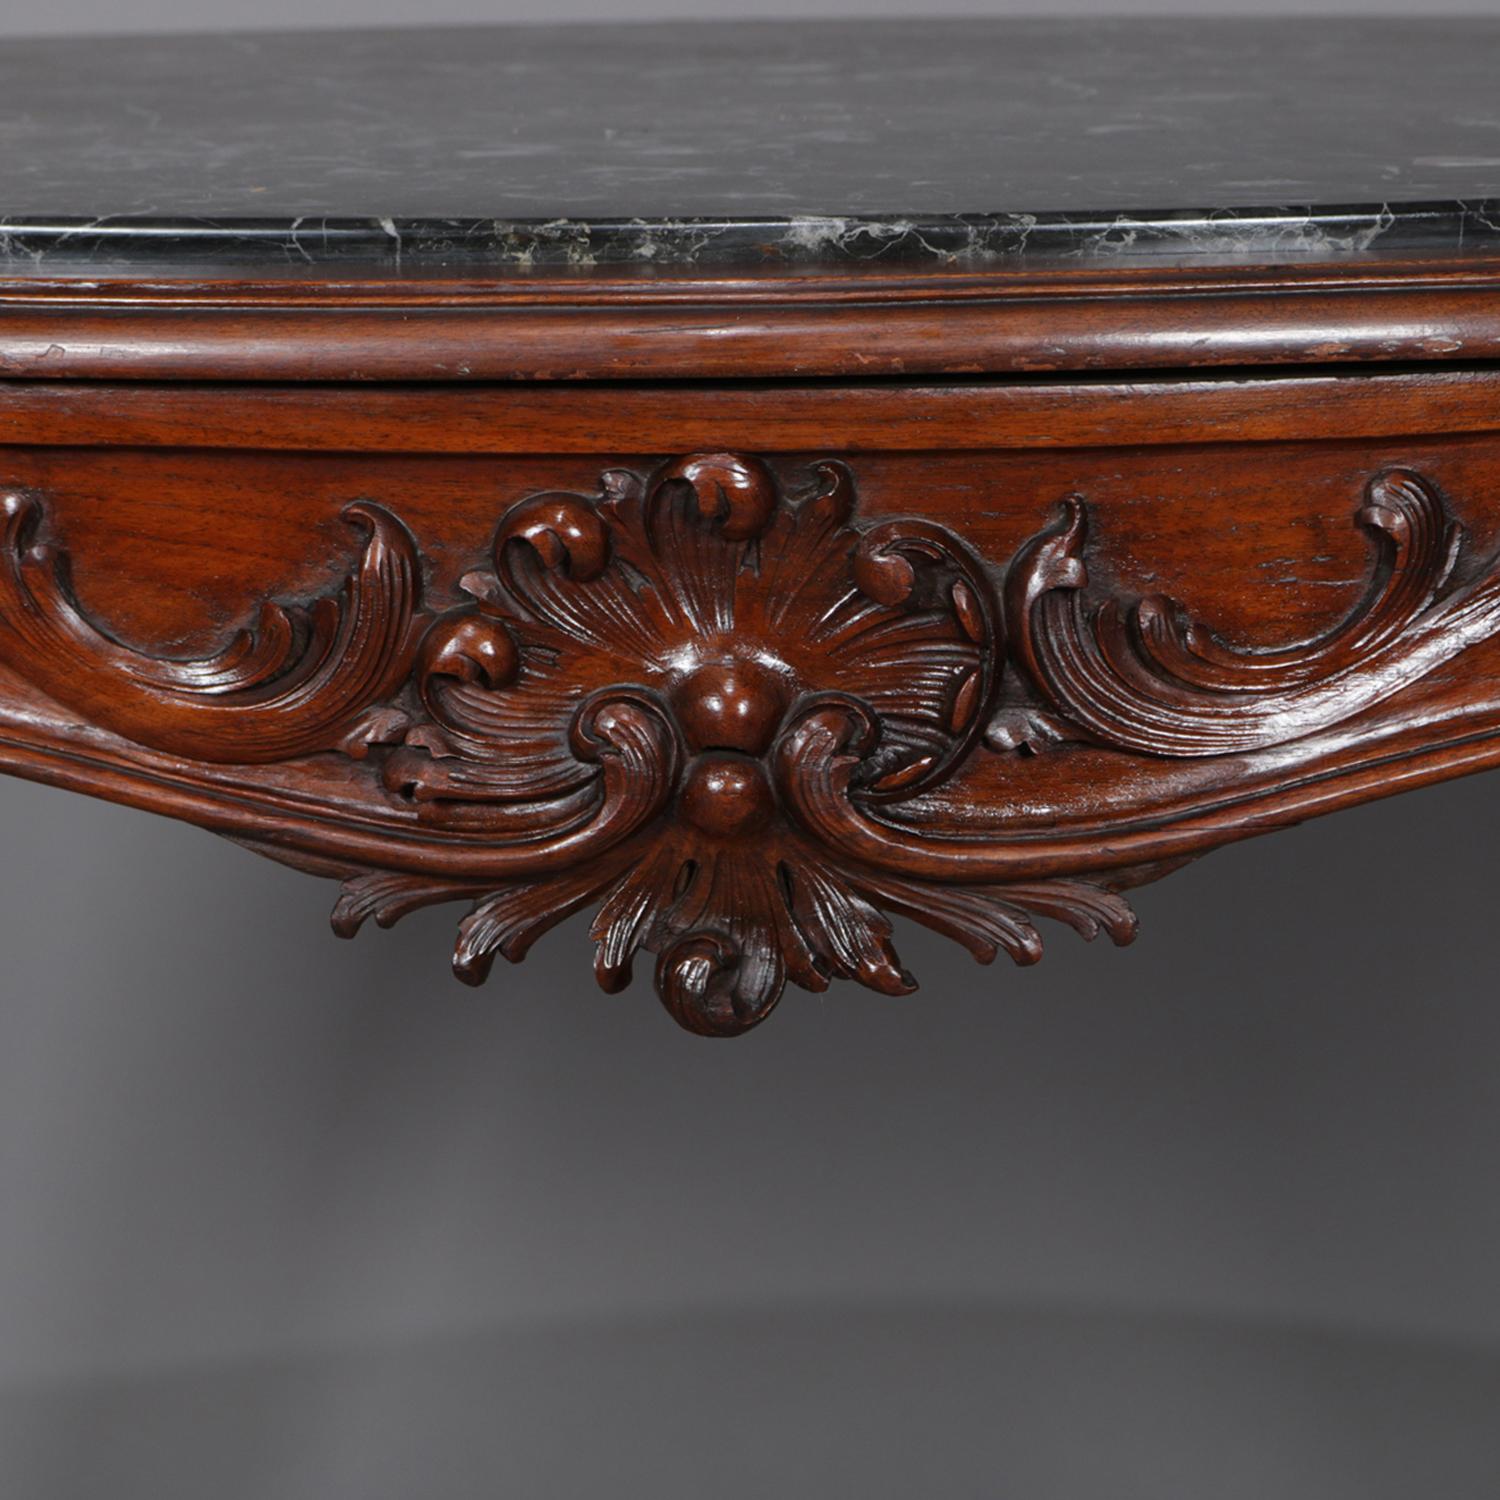 Antique French Louis XV Carved Mahogany and Marble Top Center Table (19. Jahrhundert)